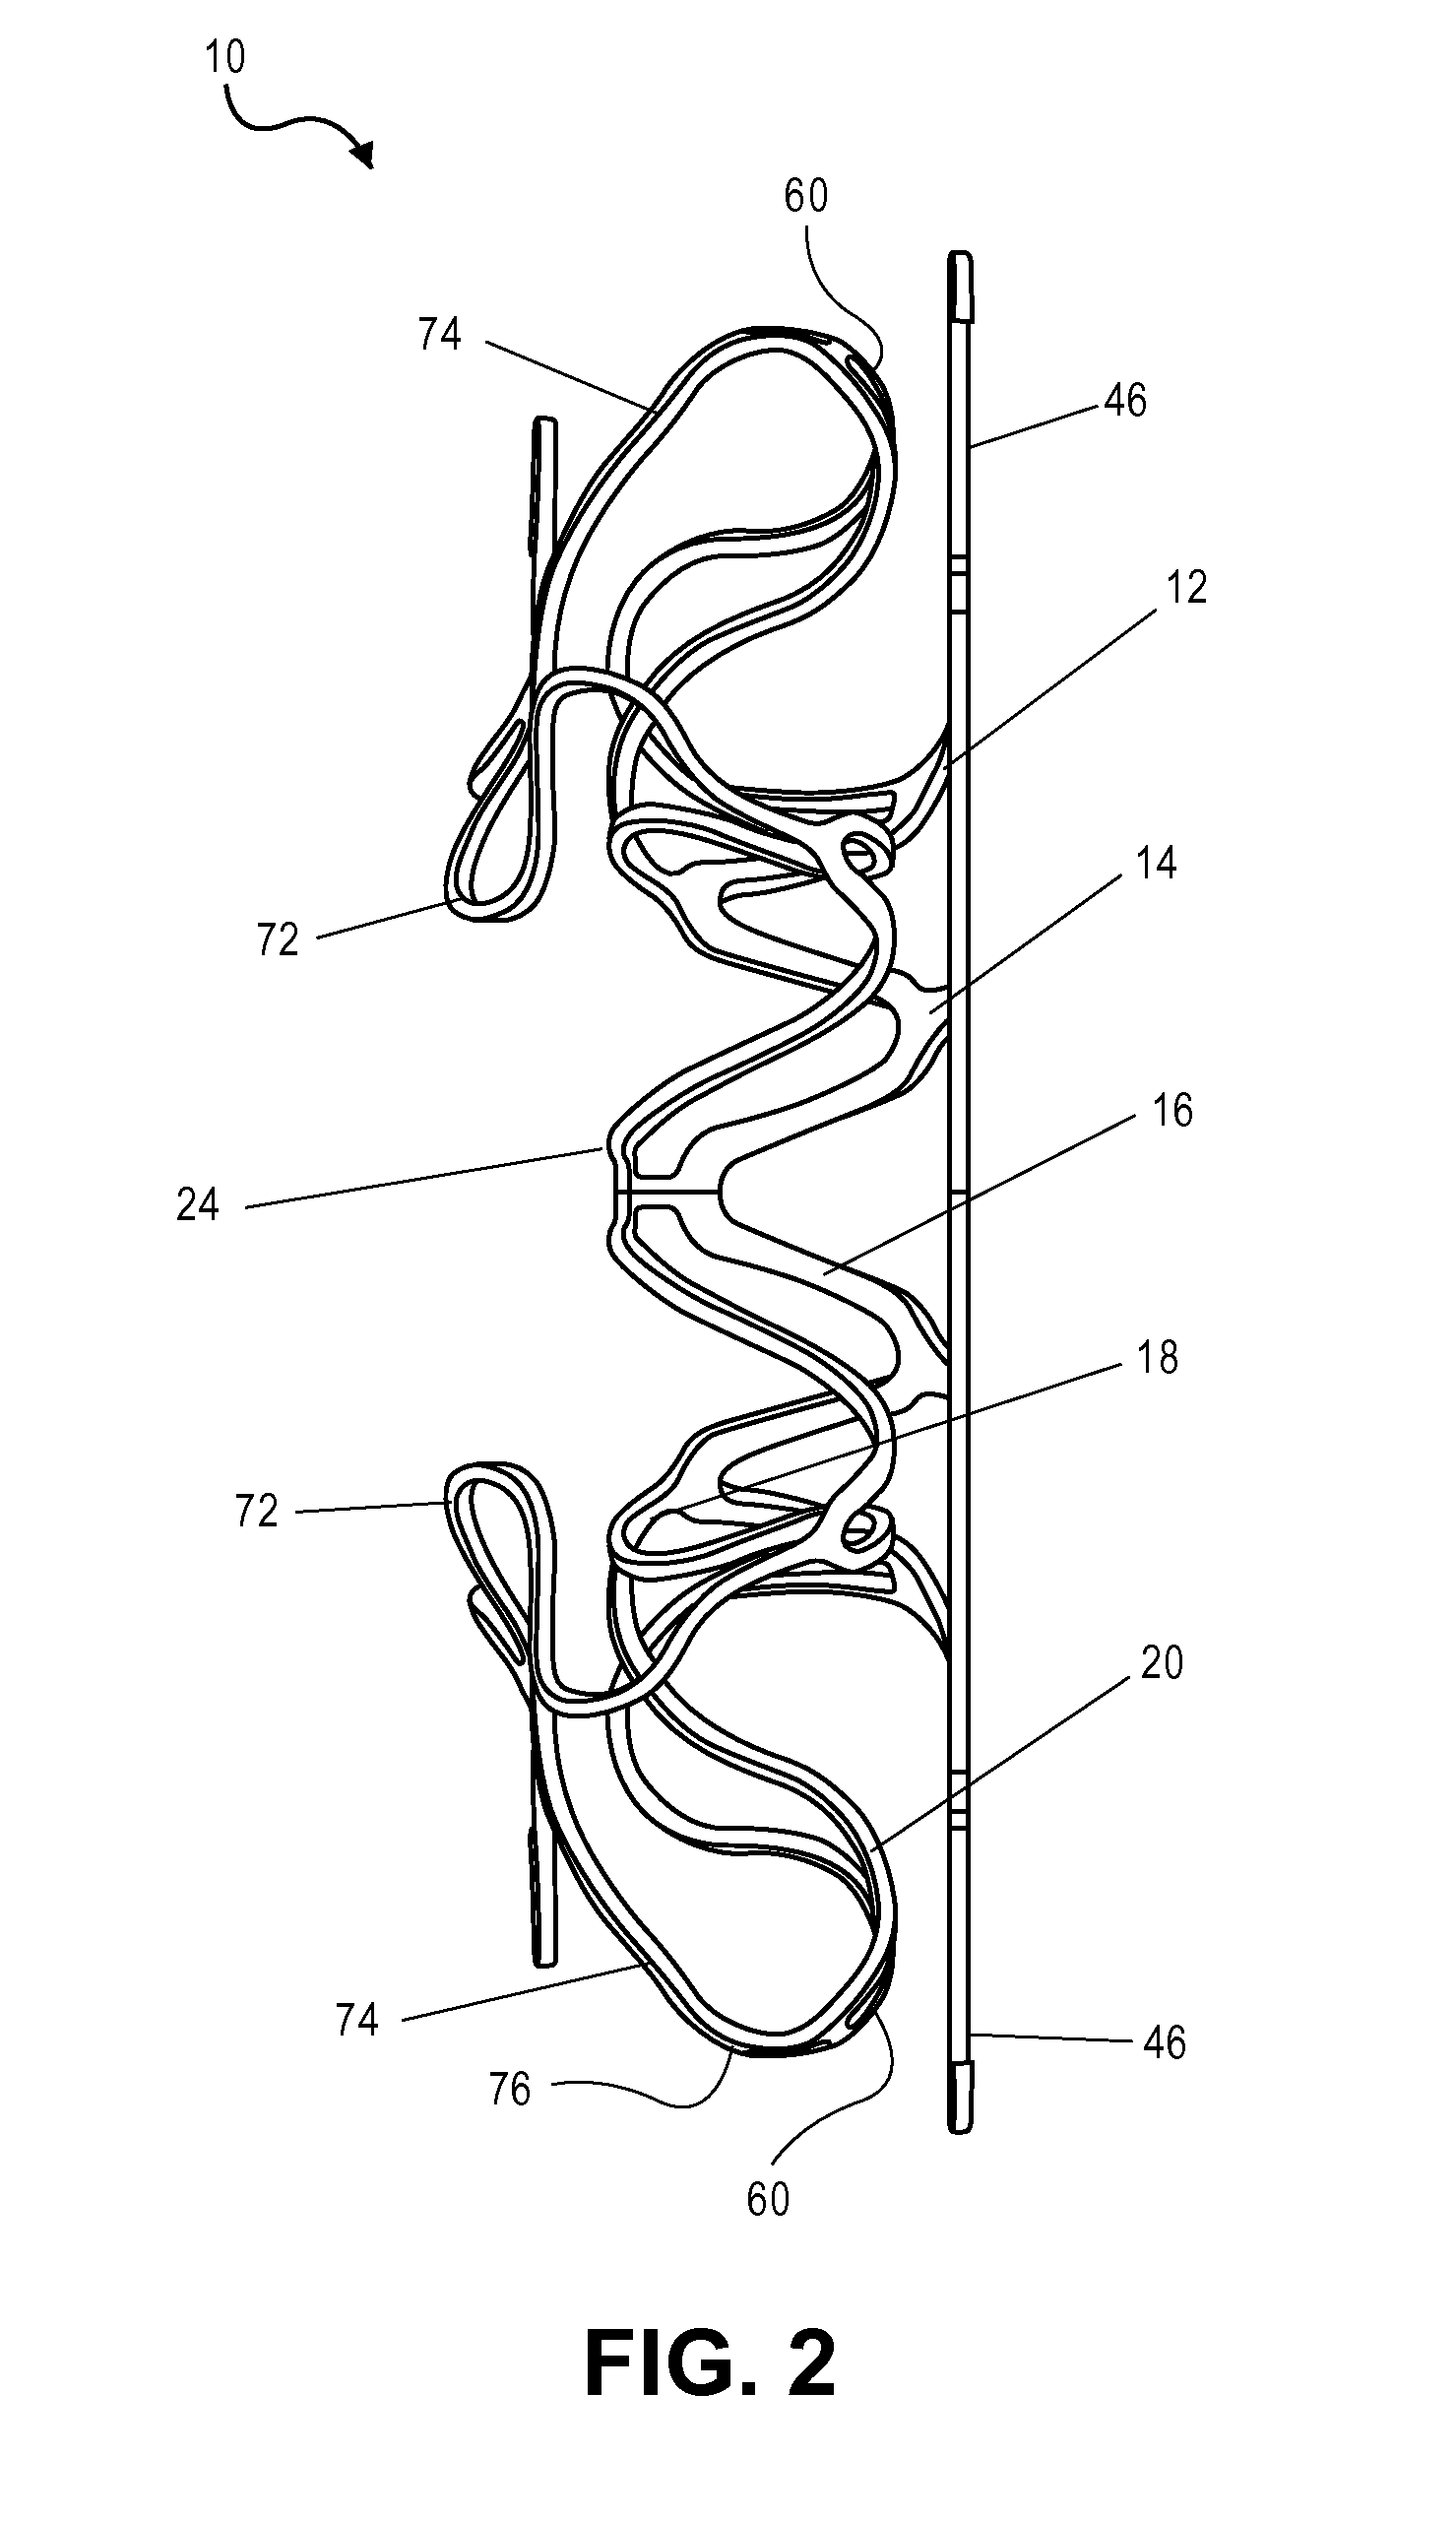 Devices and methods for treating heart failure